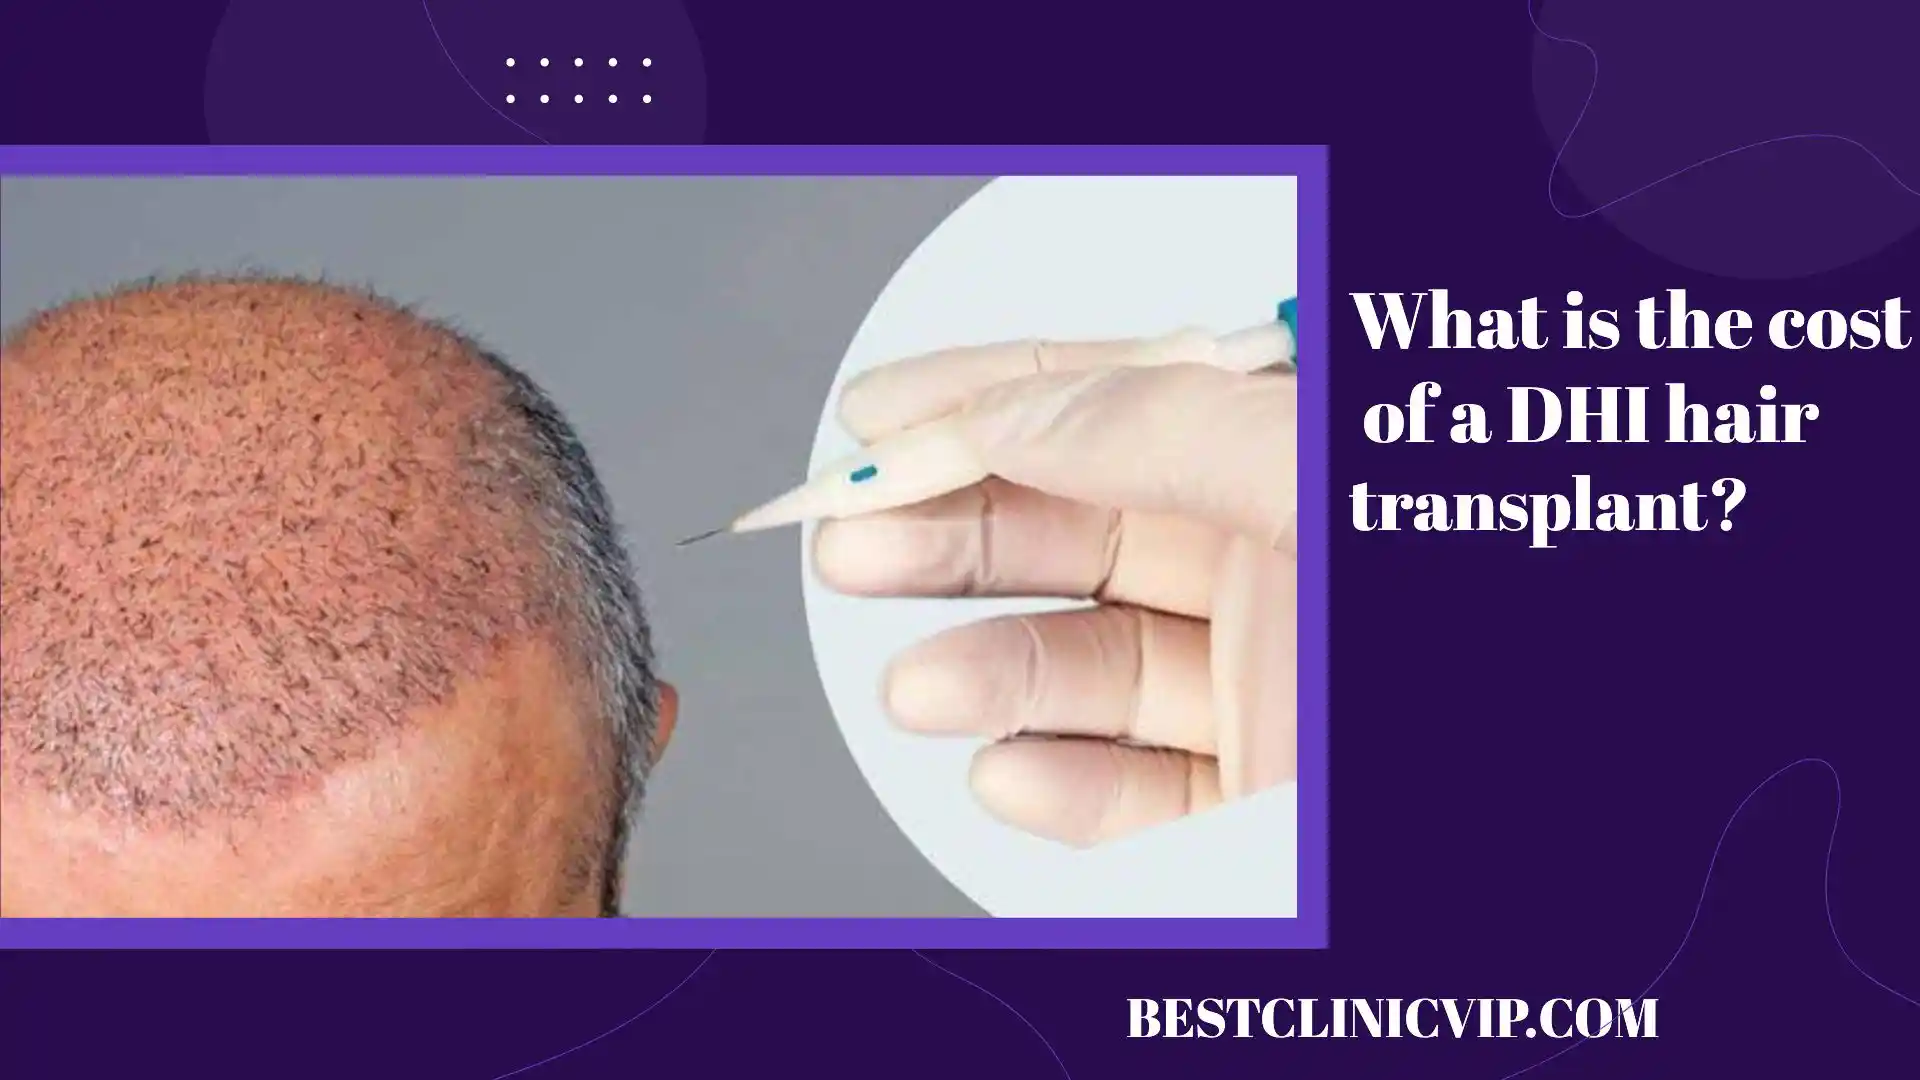 What is the cost of a DHI hair transplant?